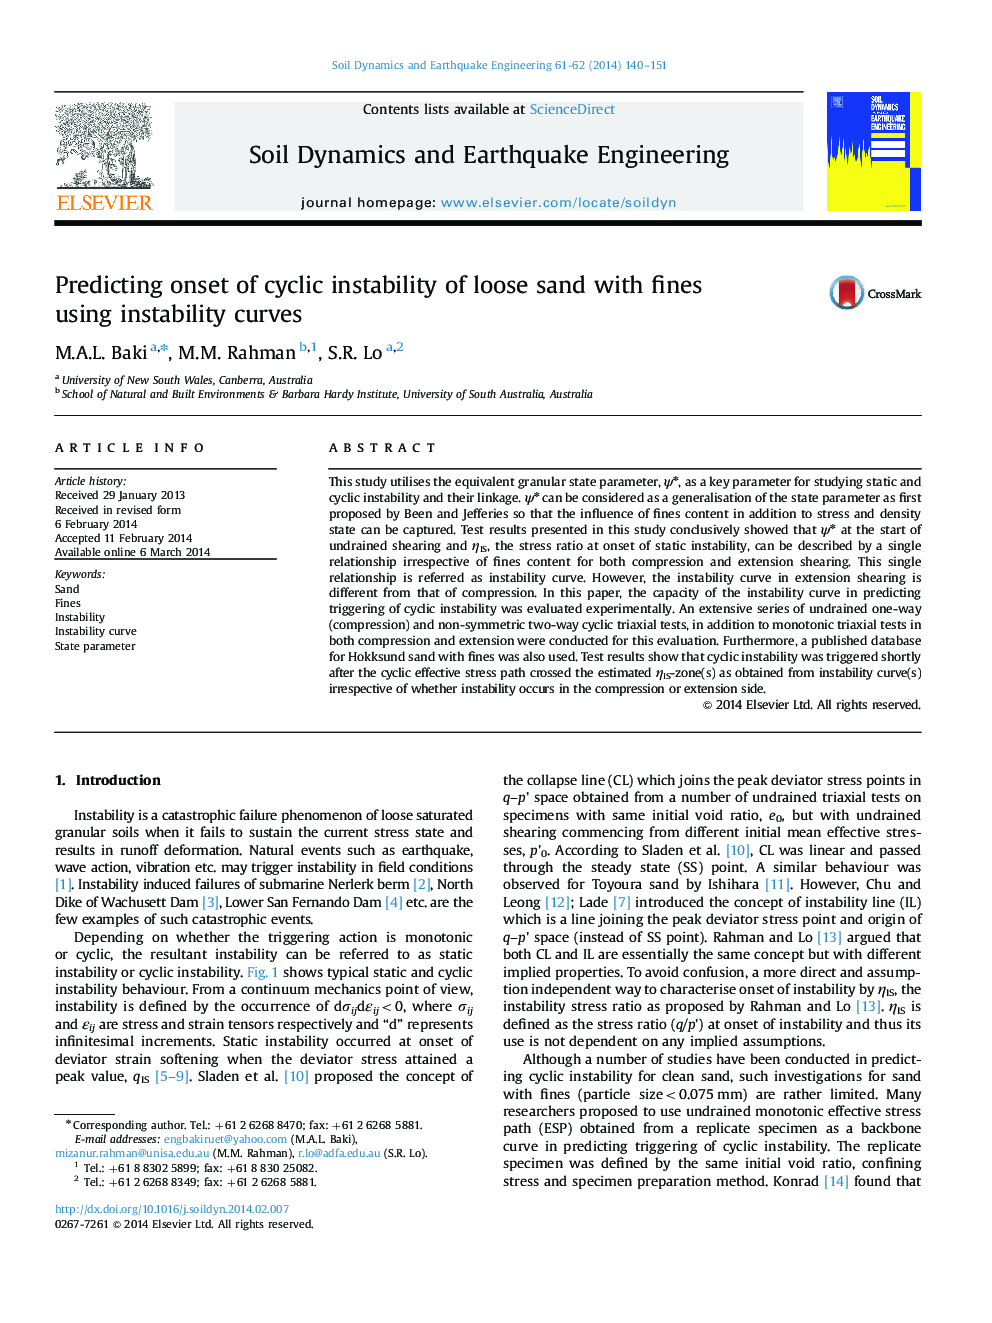 Predicting onset of cyclic instability of loose sand with fines using instability curves